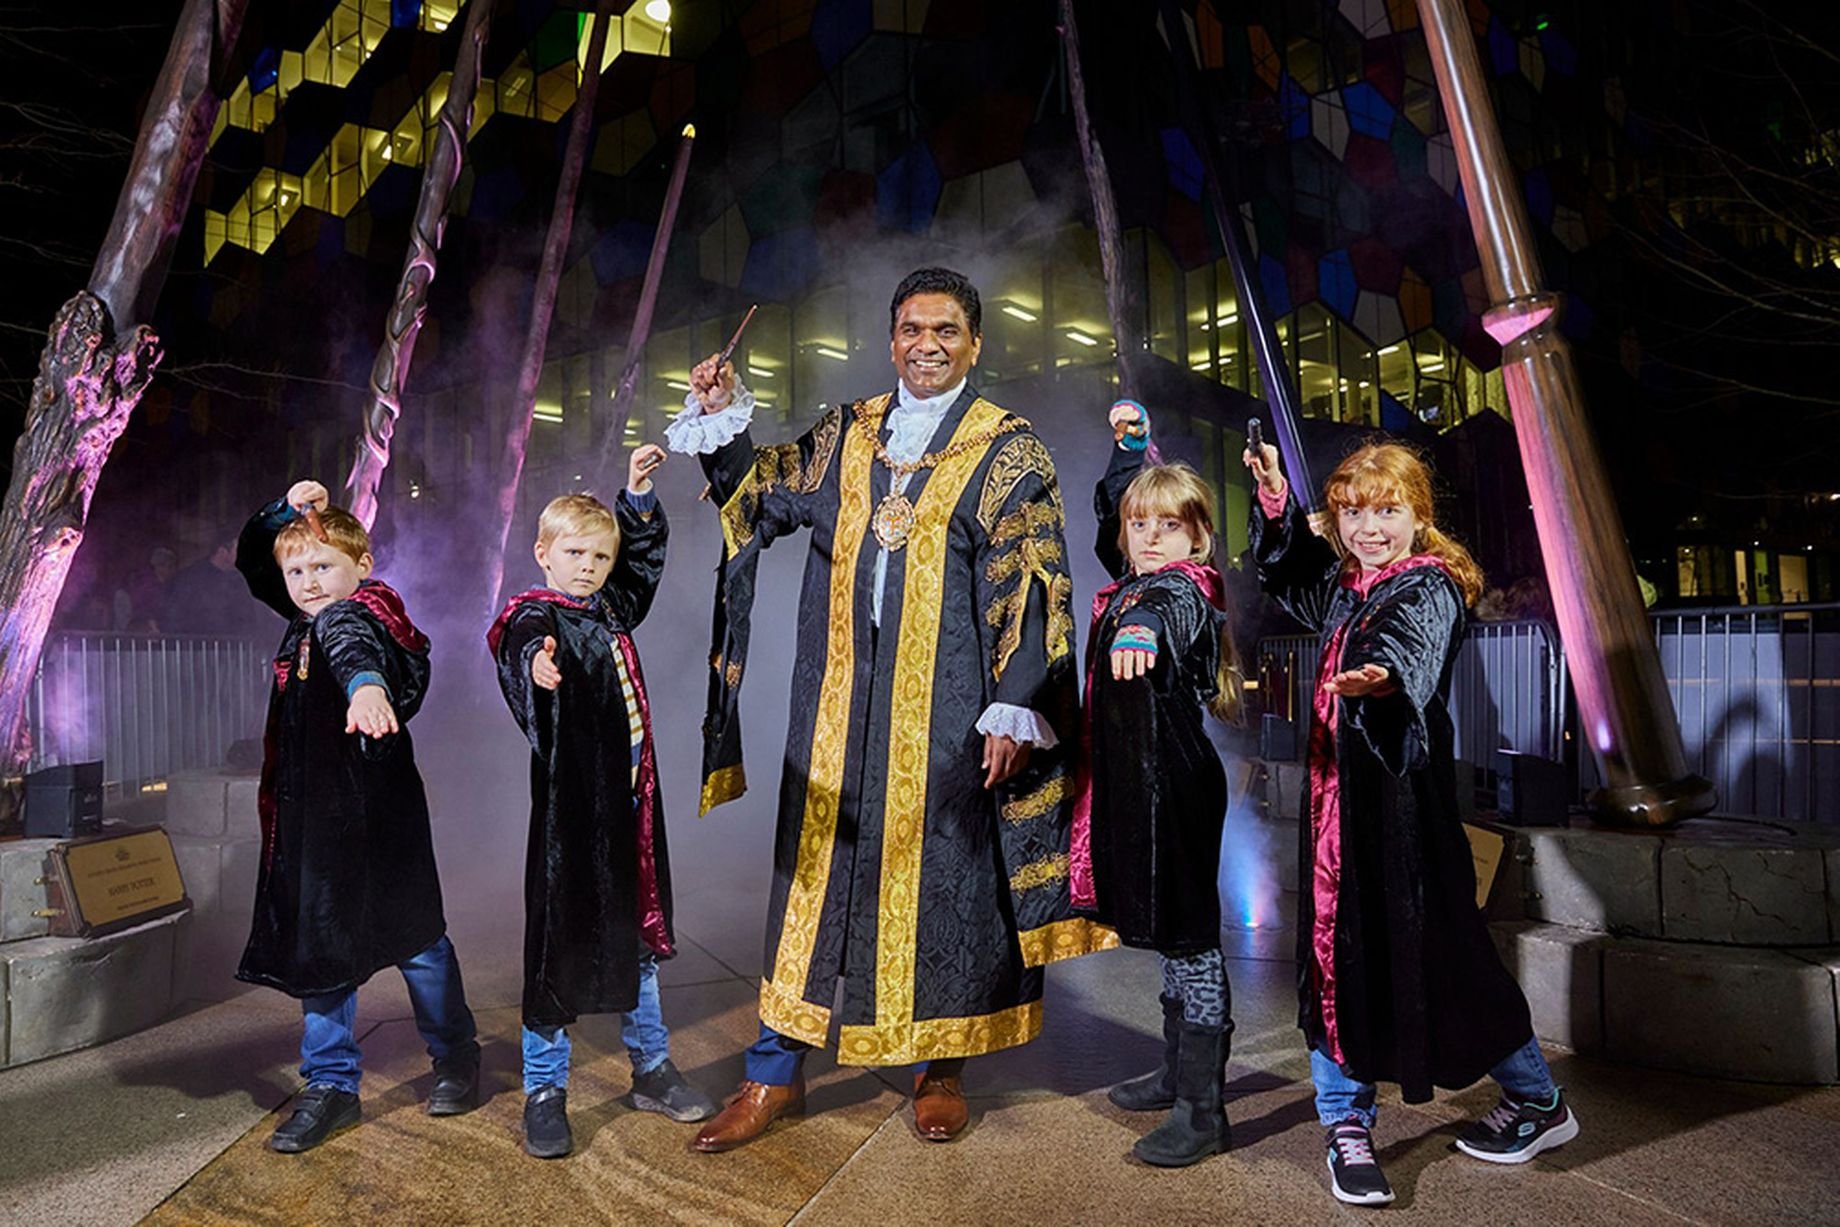 Fantastic Beasts The Secrets of Dumbledore with Lord Mayor Cllr Chandra Kanneganti 